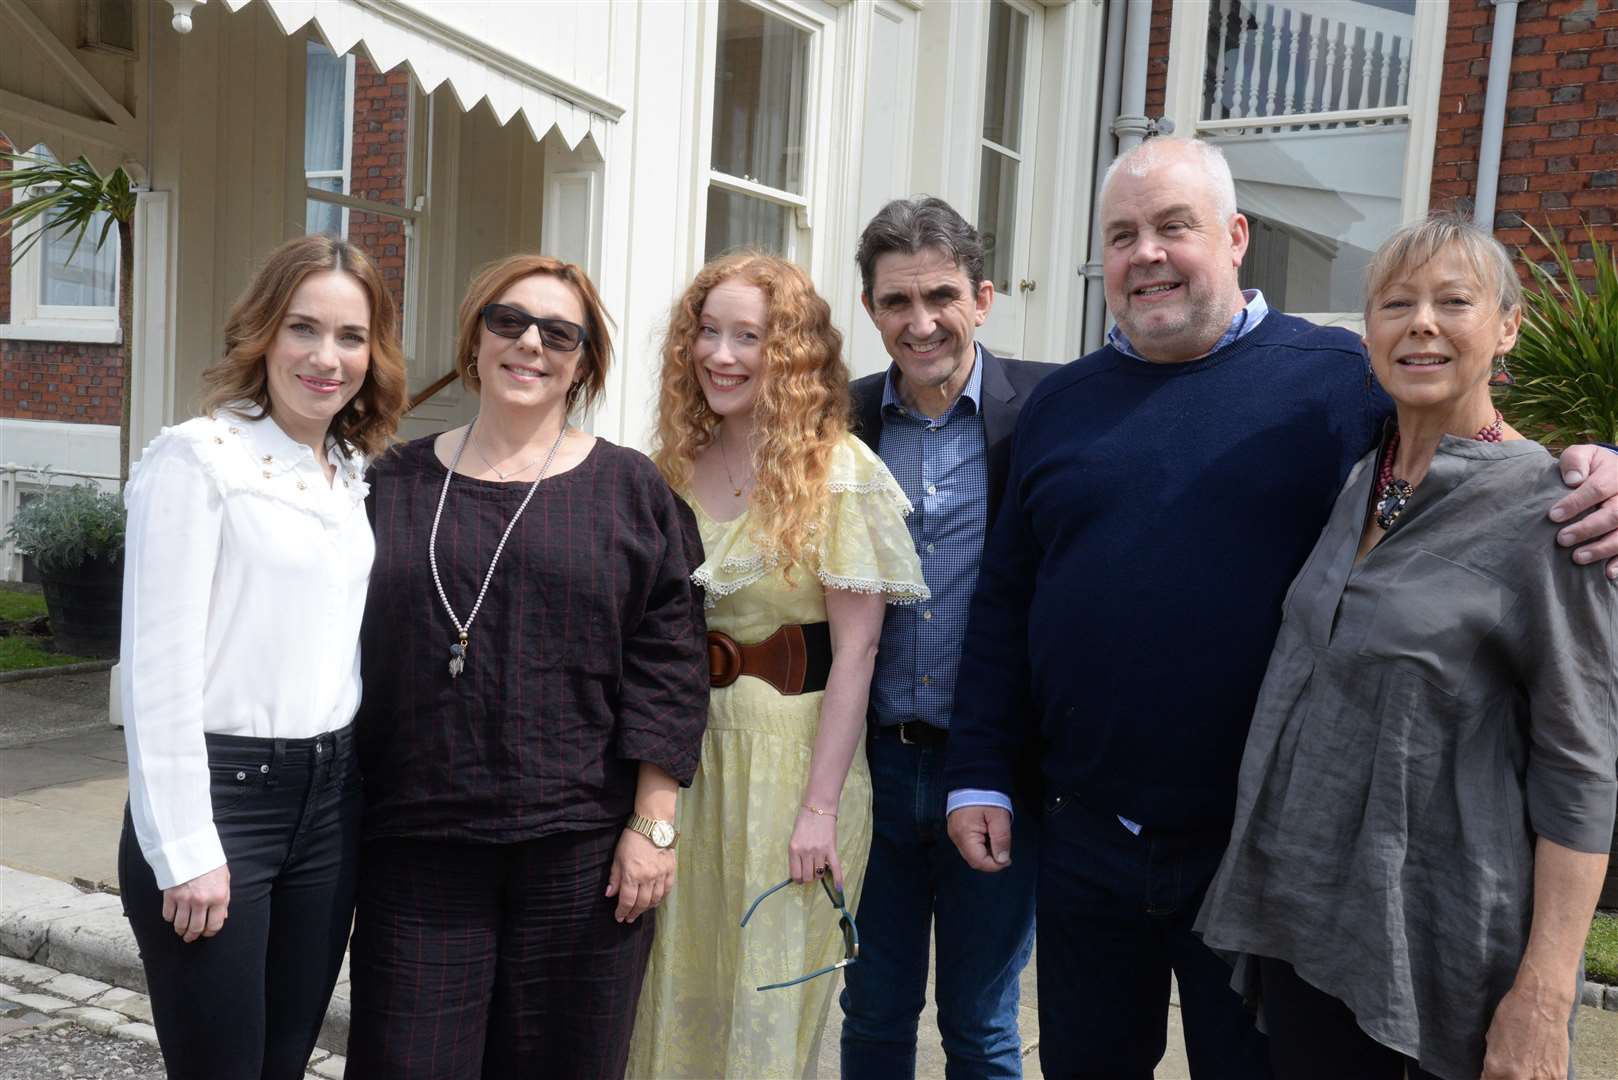 The cast of Call the Midwife at Chatham Historic Dockyard, from left, Laura Main (Shelagh Turner), Annabelle Apsion (Violet), Victoria Yeates (Sister Winifred), Stephen McGann (Dr Turner), Cliff Parisi (Fred) and Jenny Agutter (Sister Julienne). Picture: Chris Davey